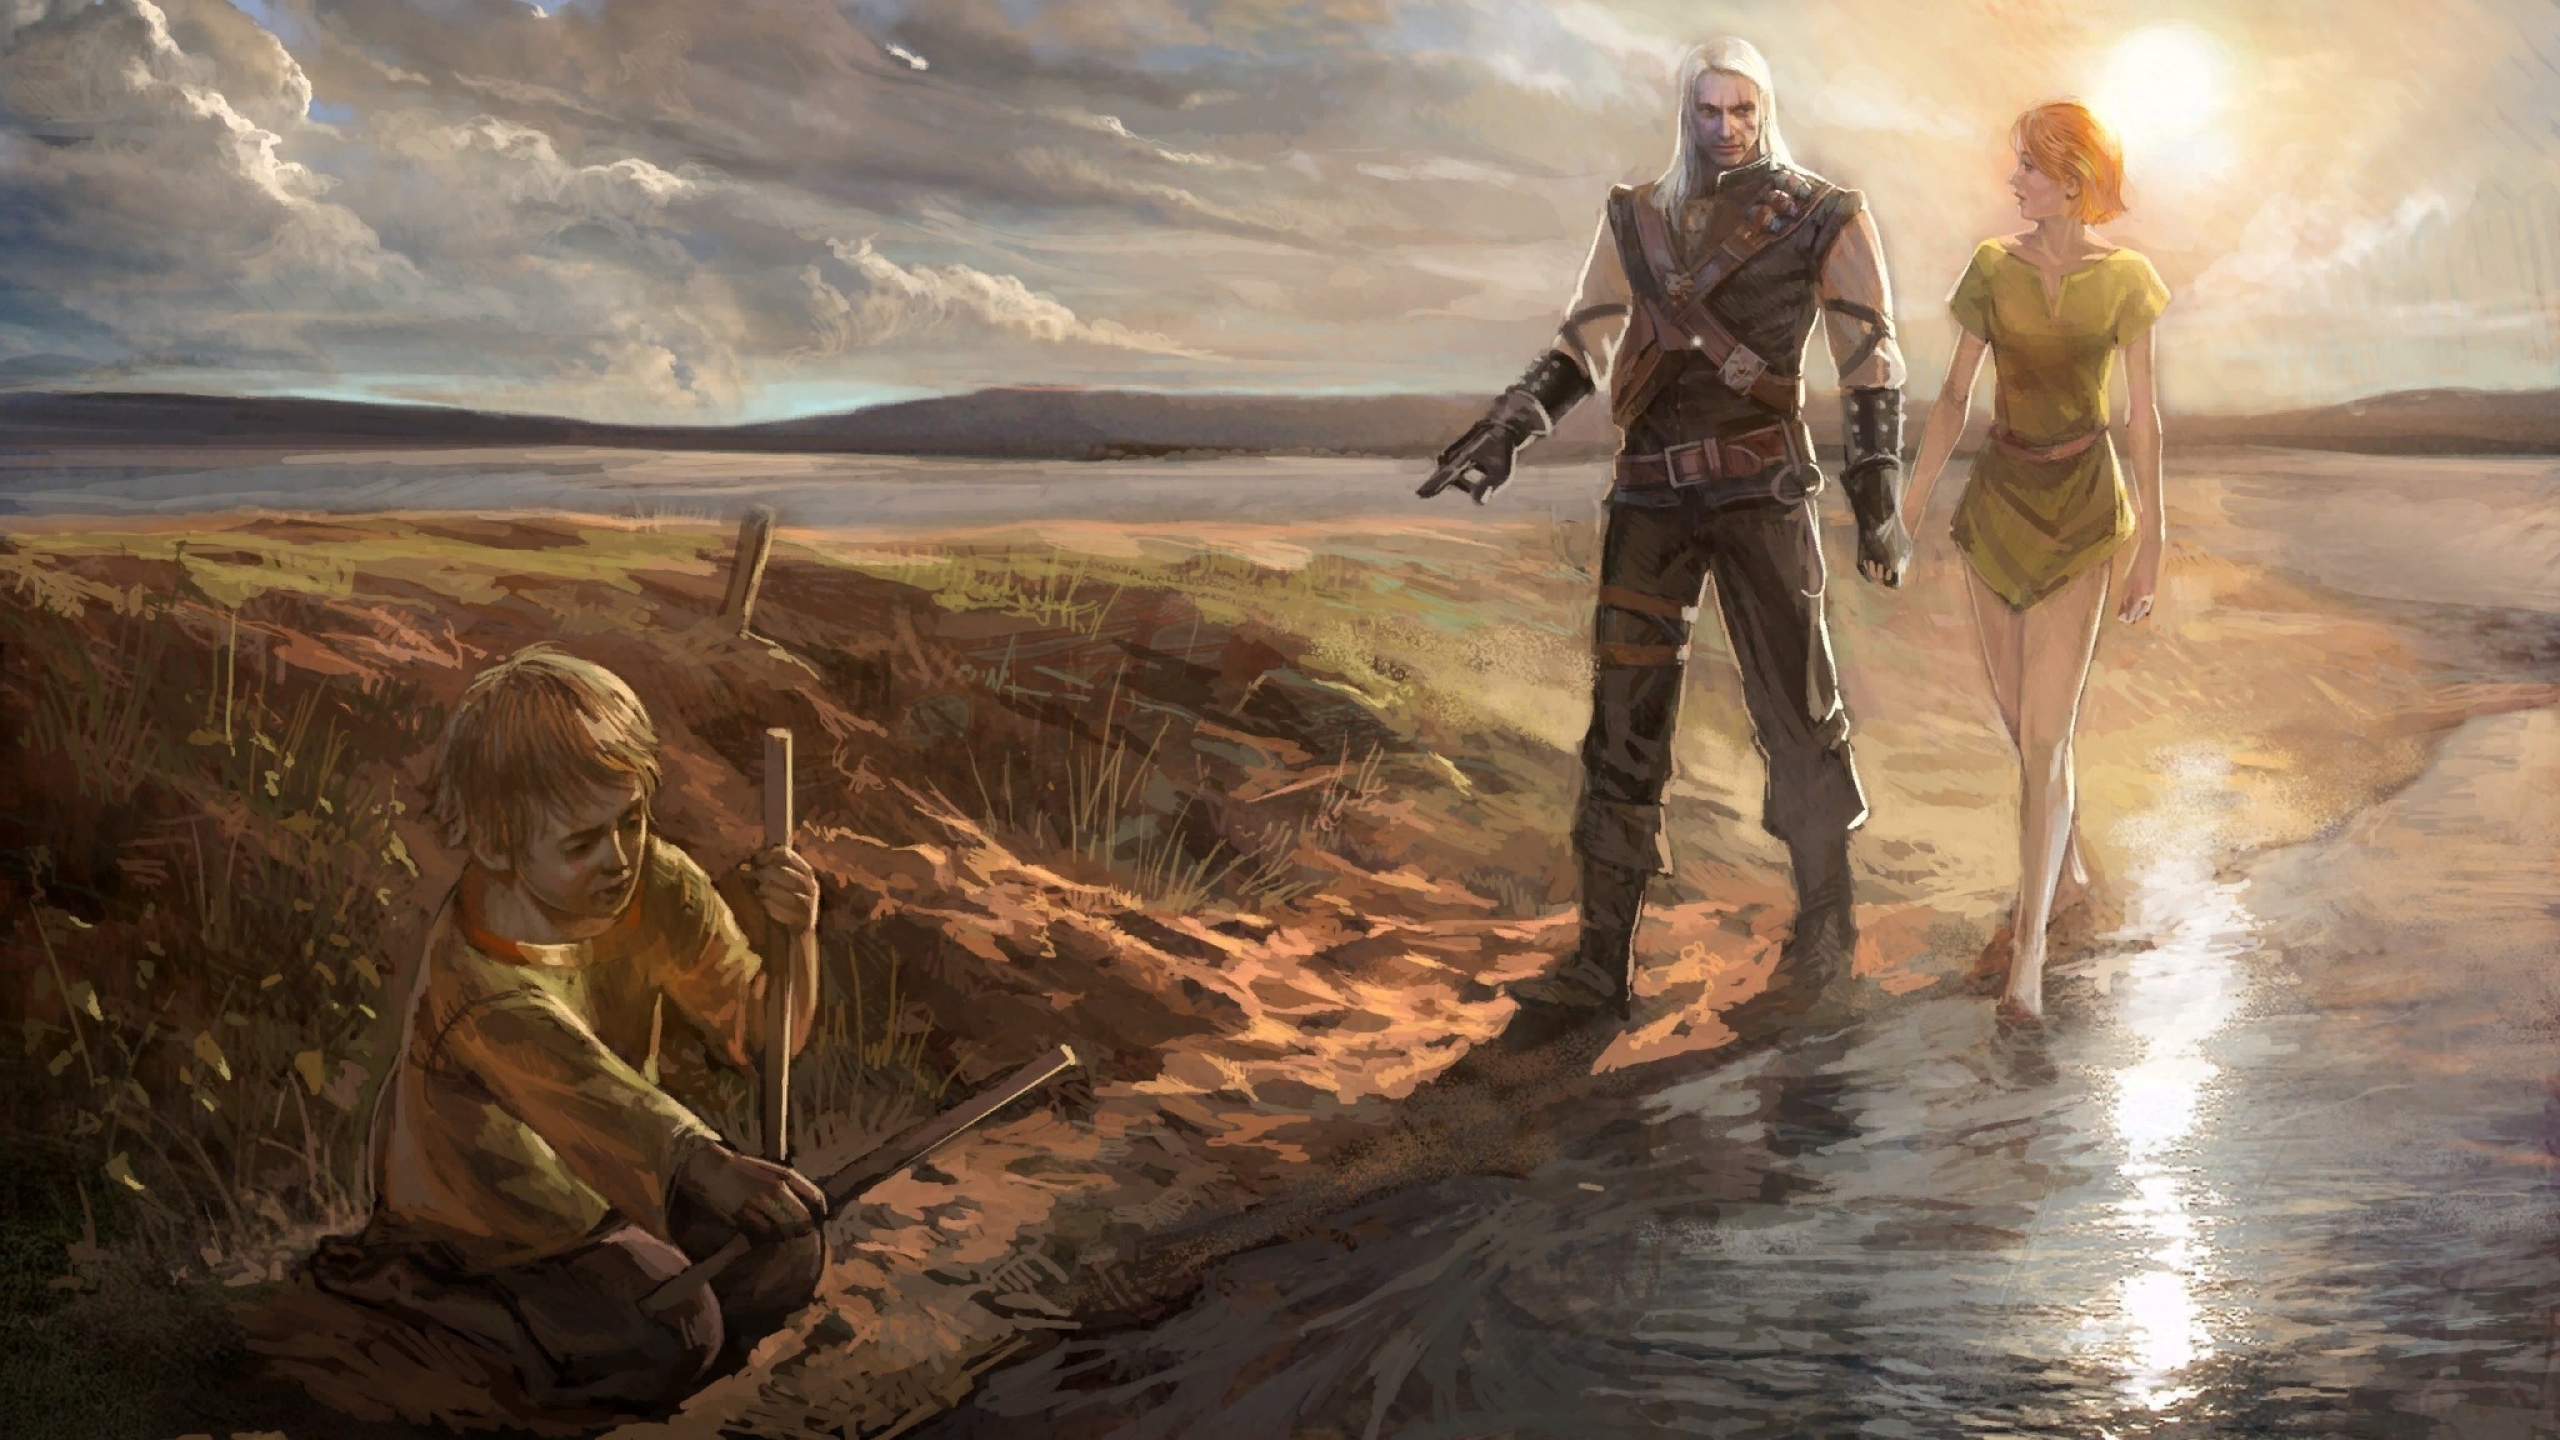 Download Wallpapers Download 2560x1440 video games rpg pc the witcher 2560x1440